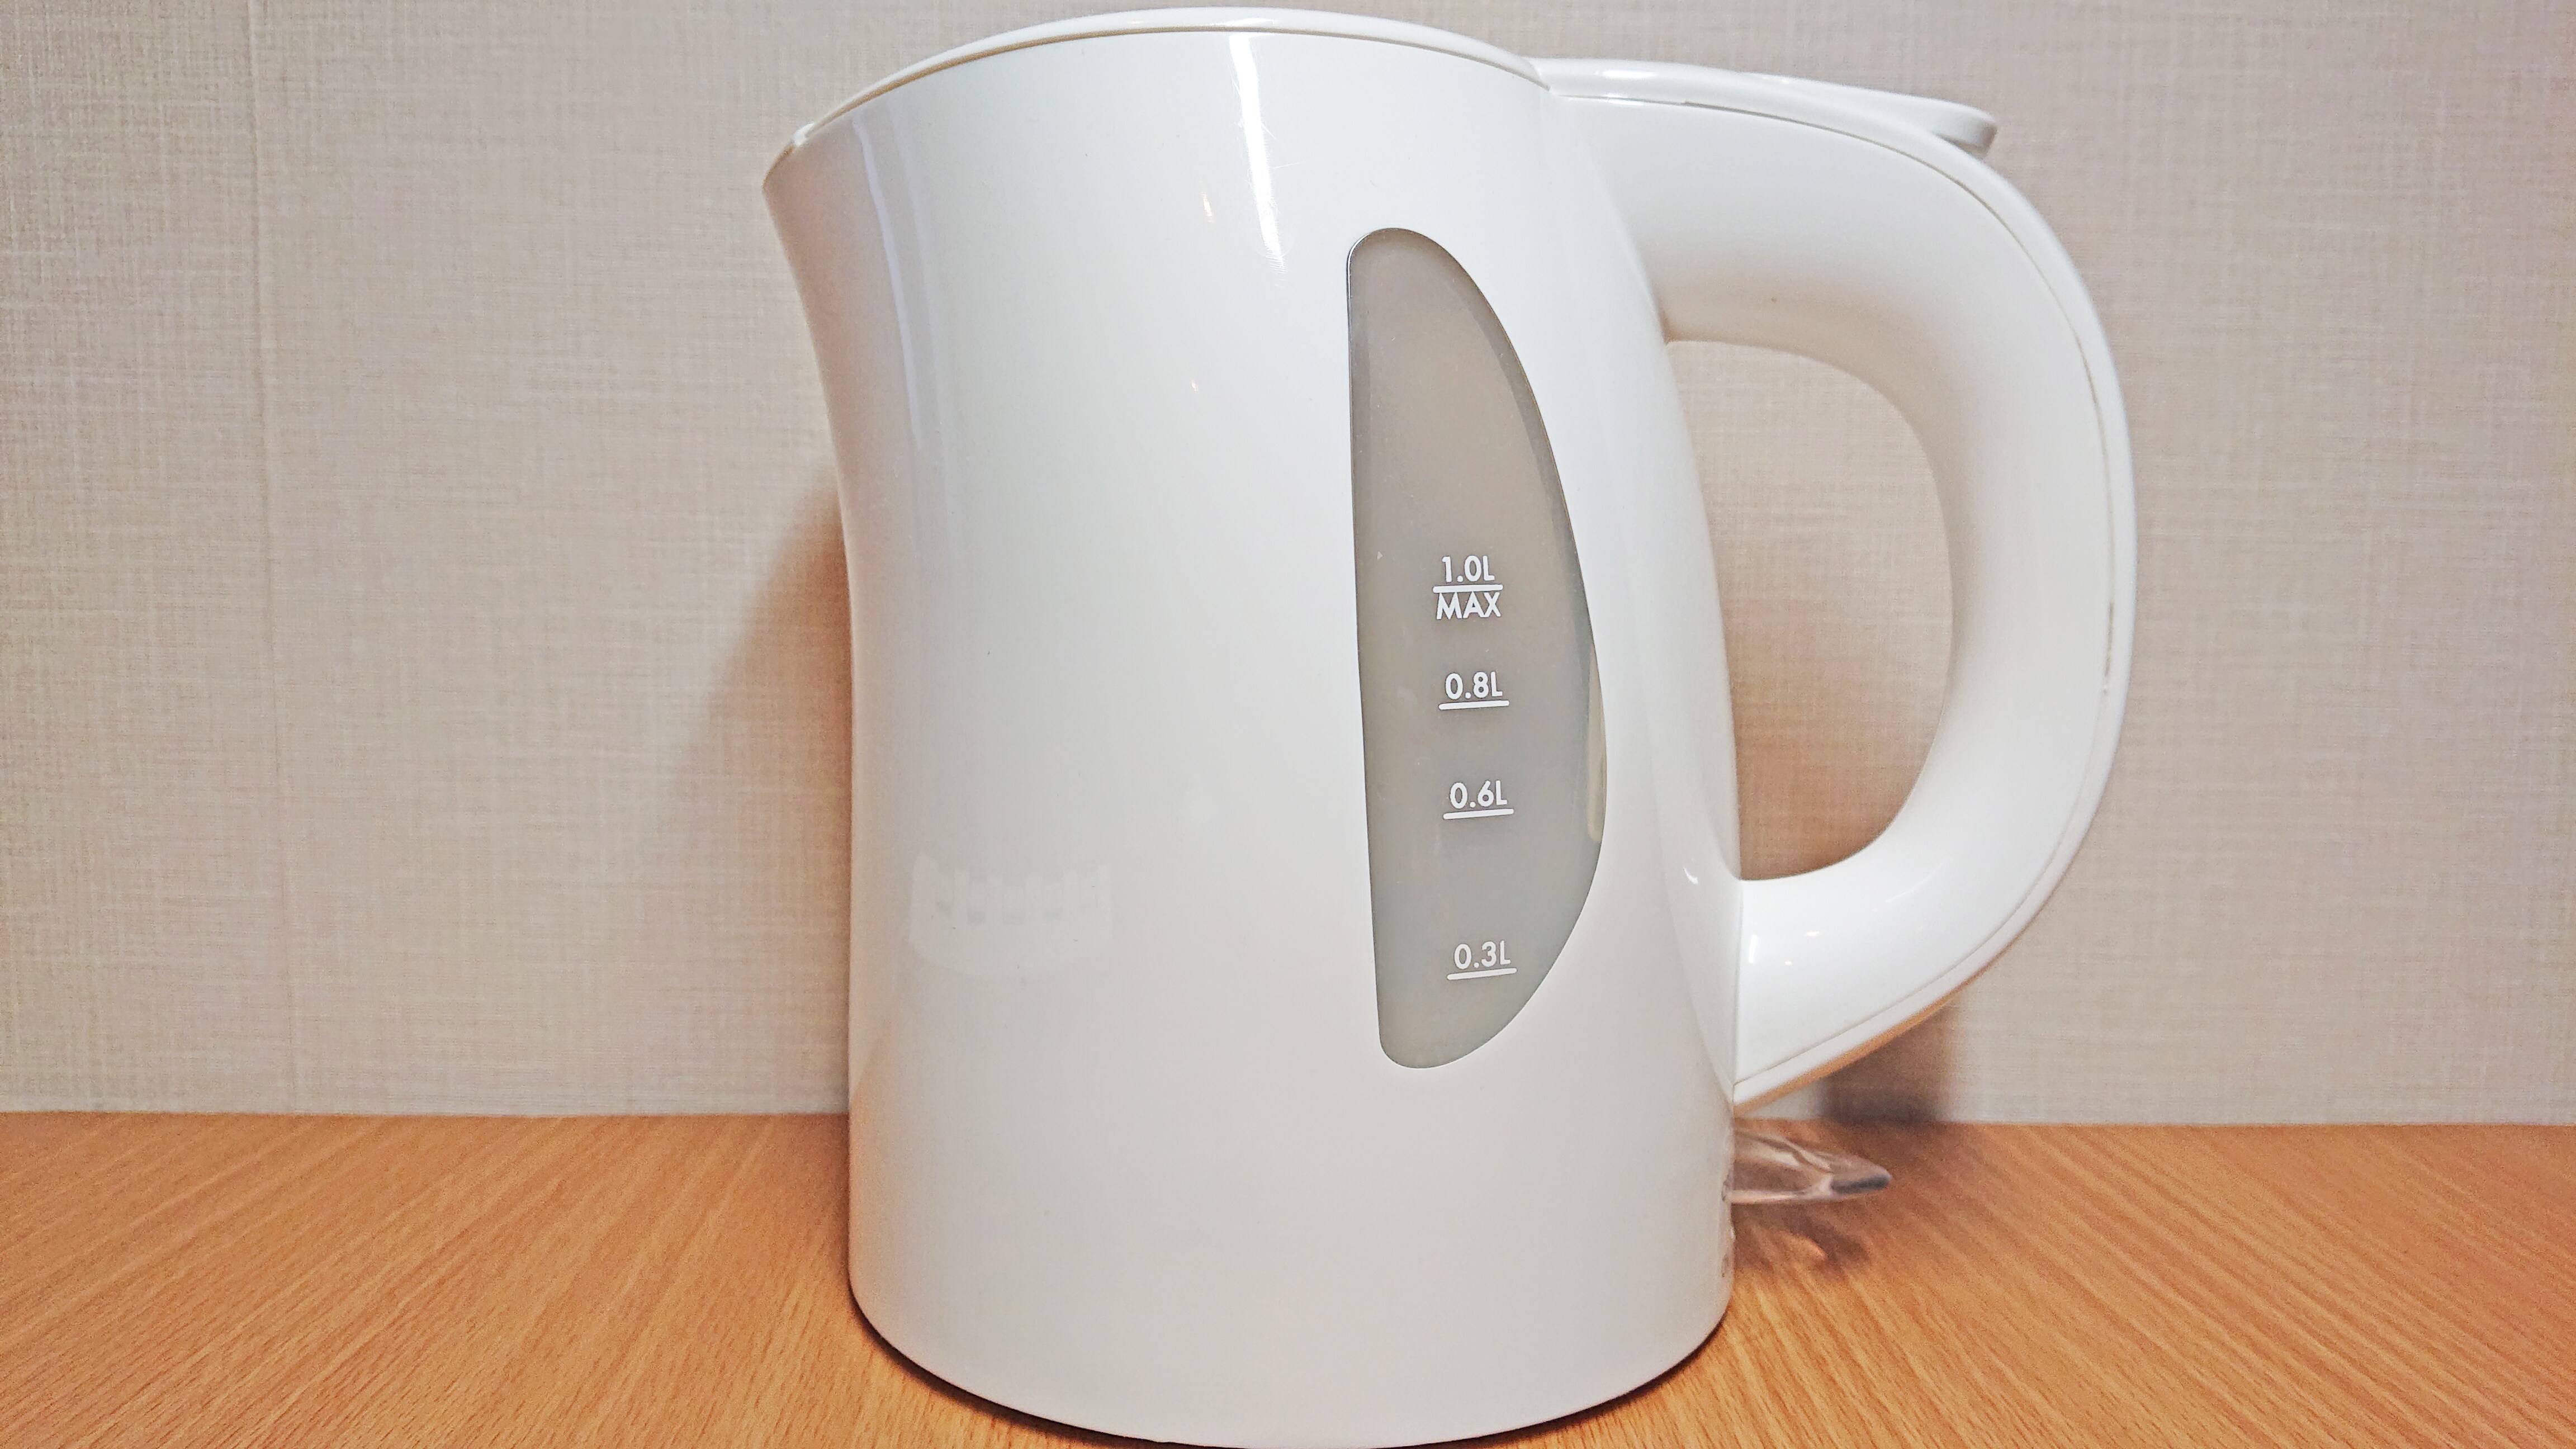 "Electric kettle"